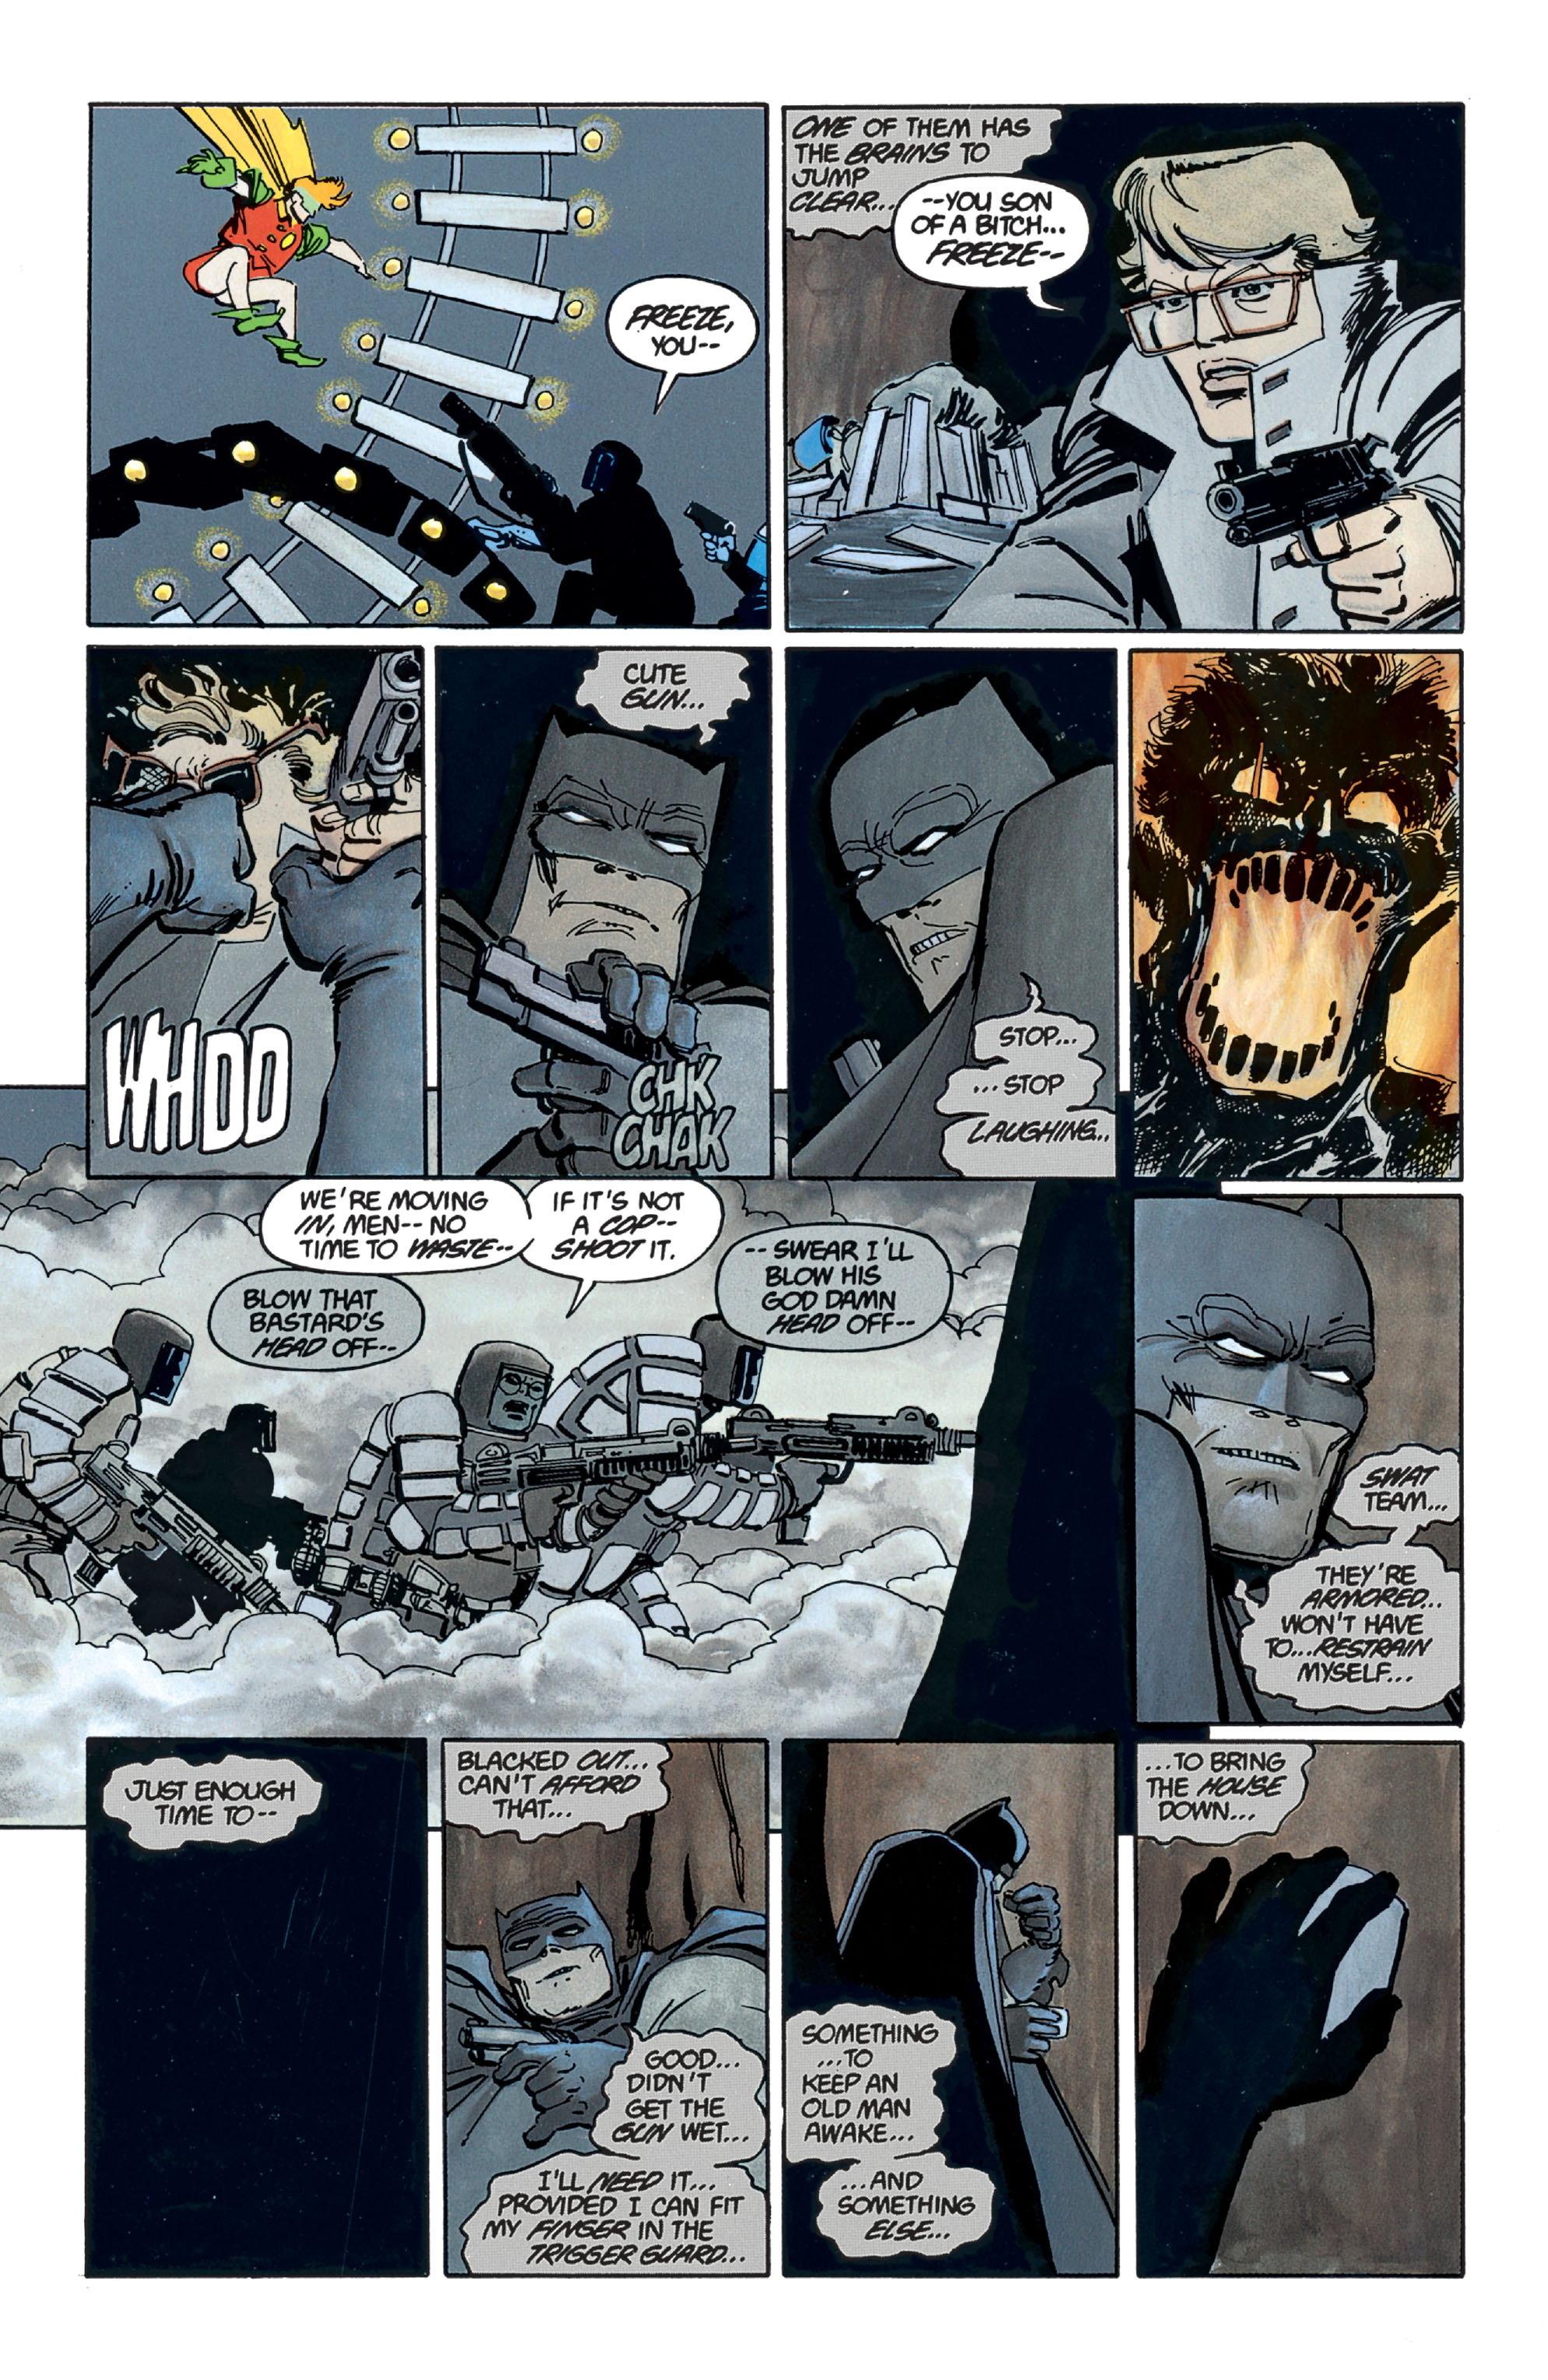 Batman The Dark Knight Returns Issue 4 | Read Batman The Dark Knight Returns  Issue 4 comic online in high quality. Read Full Comic online for free -  Read comics online in